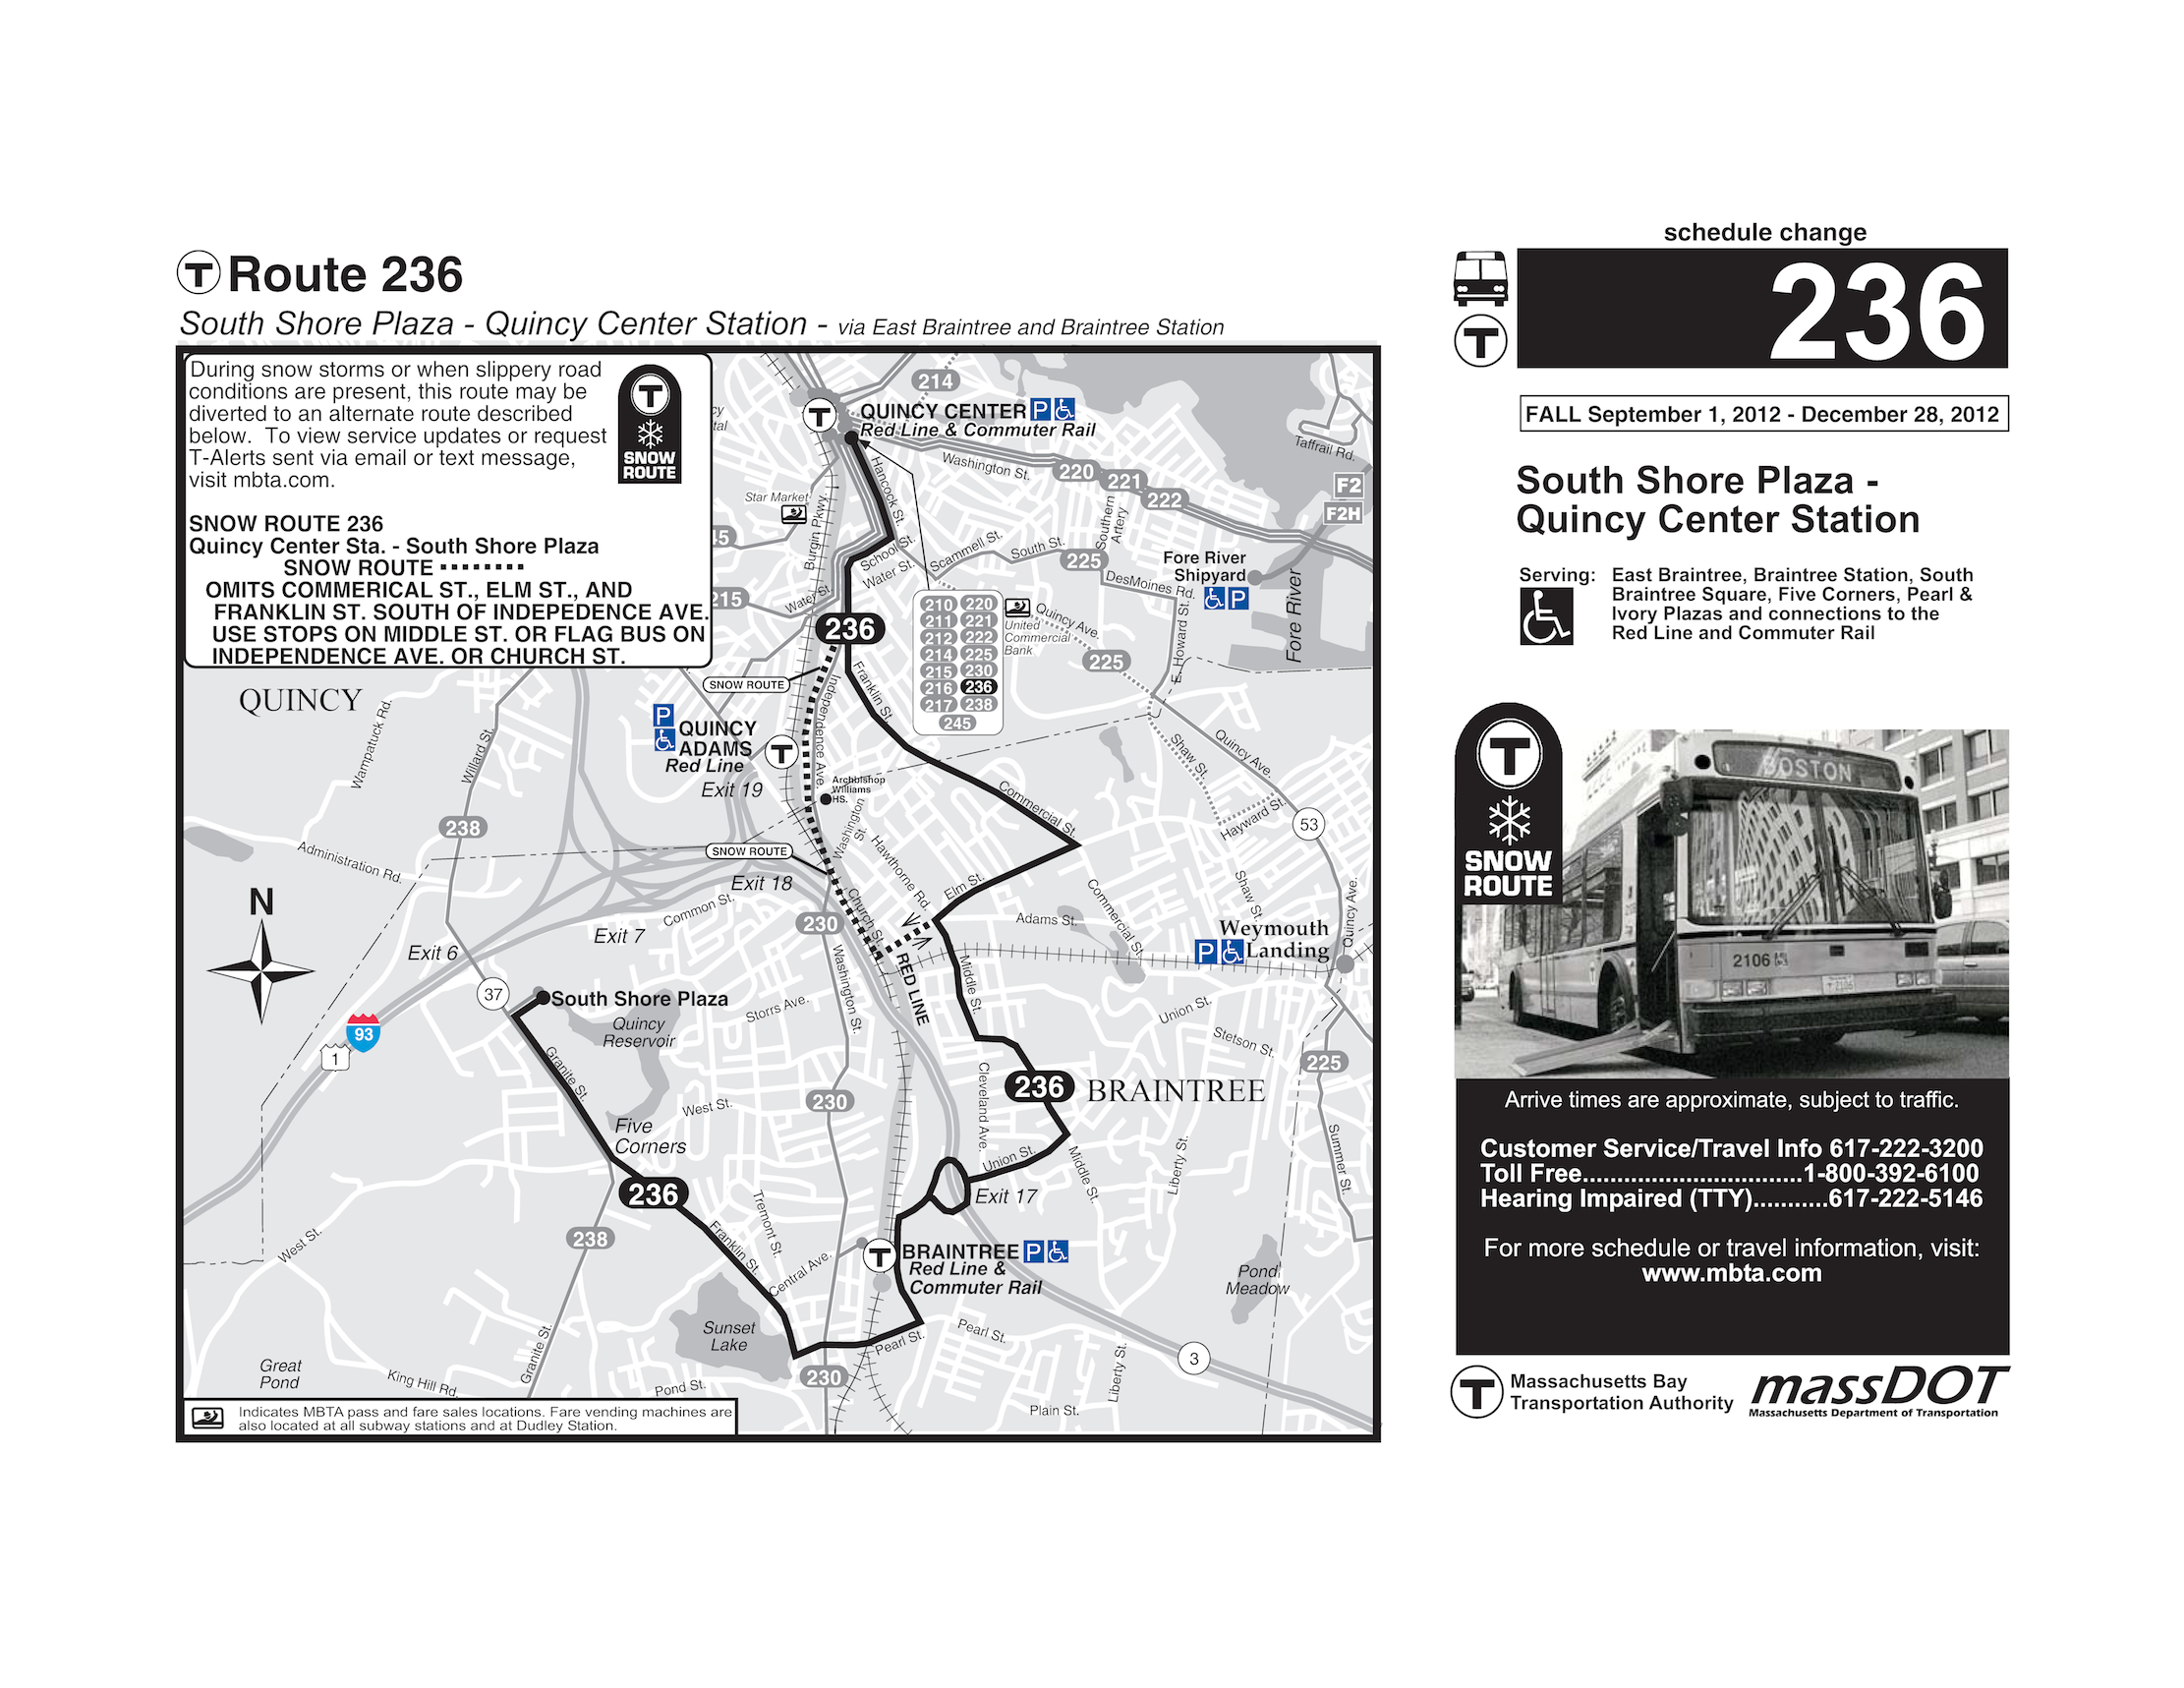 This page is the MBTA map of bus Route 236, between South Shore Plaza and Quincy Center Station.